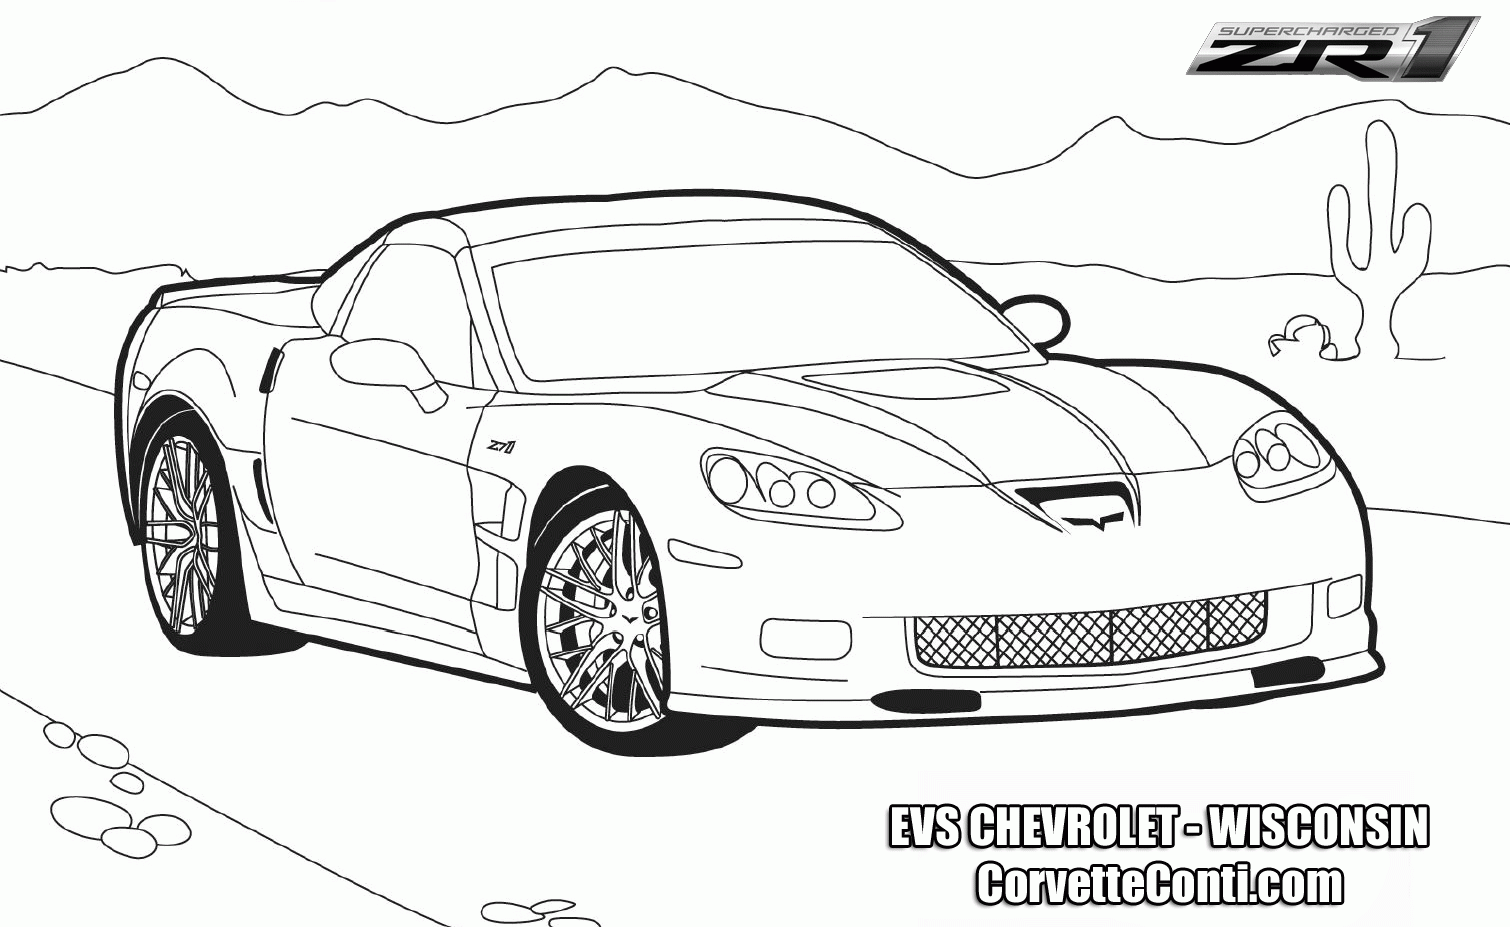 Corvette Coloring Page Coloring Home Color in this picture of a corvette zr1 and others with our library of online coloring pages. corvette coloring page coloring home